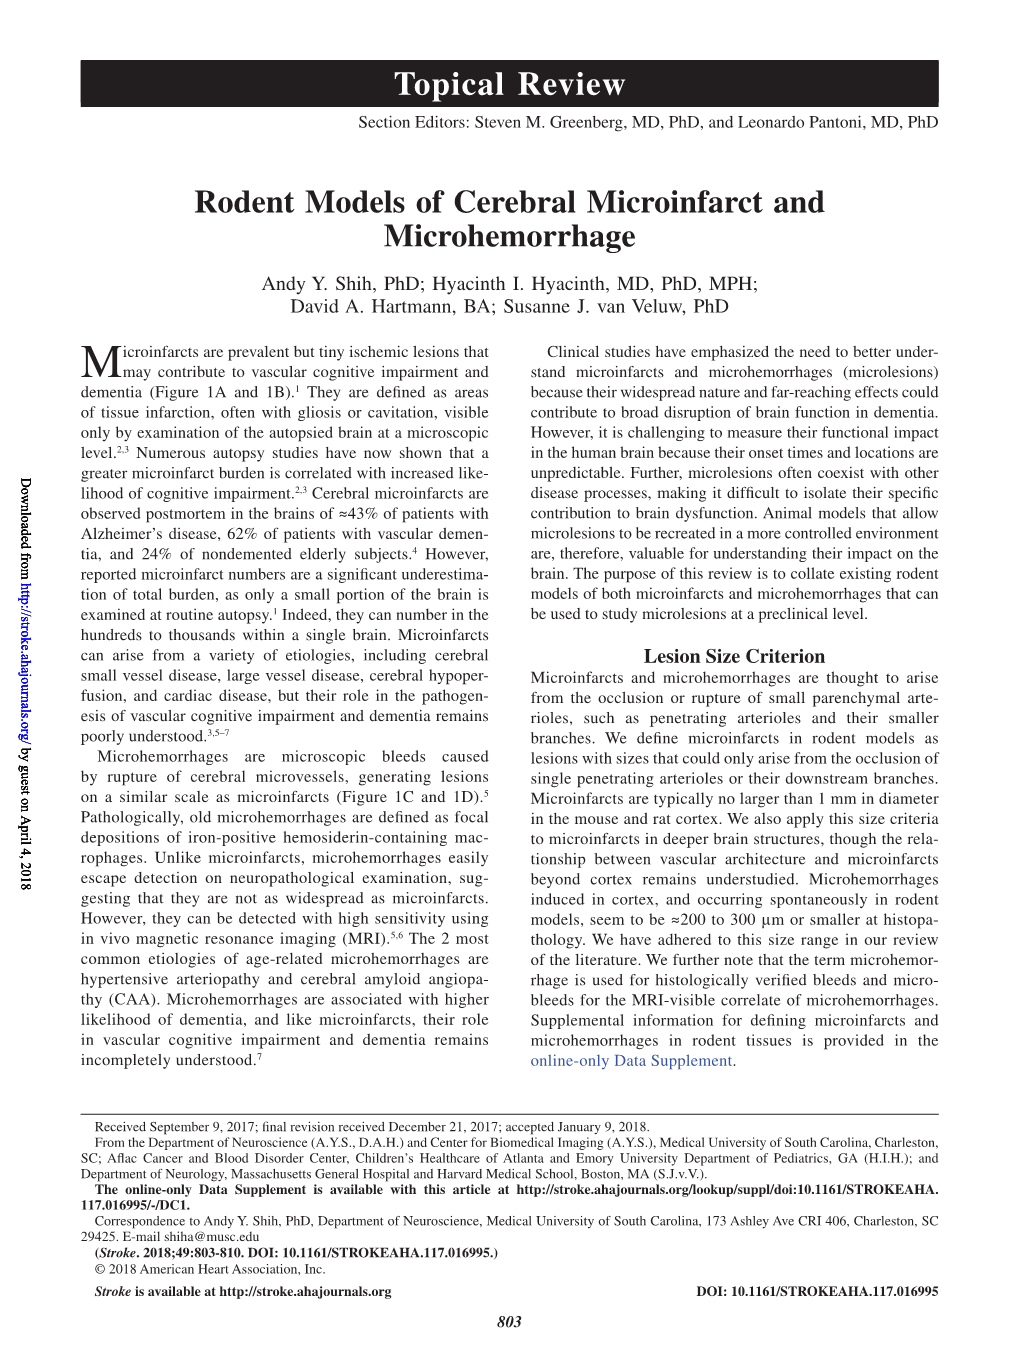 Rodent Models of Cerebral Microinfarct and Microhemorrhage